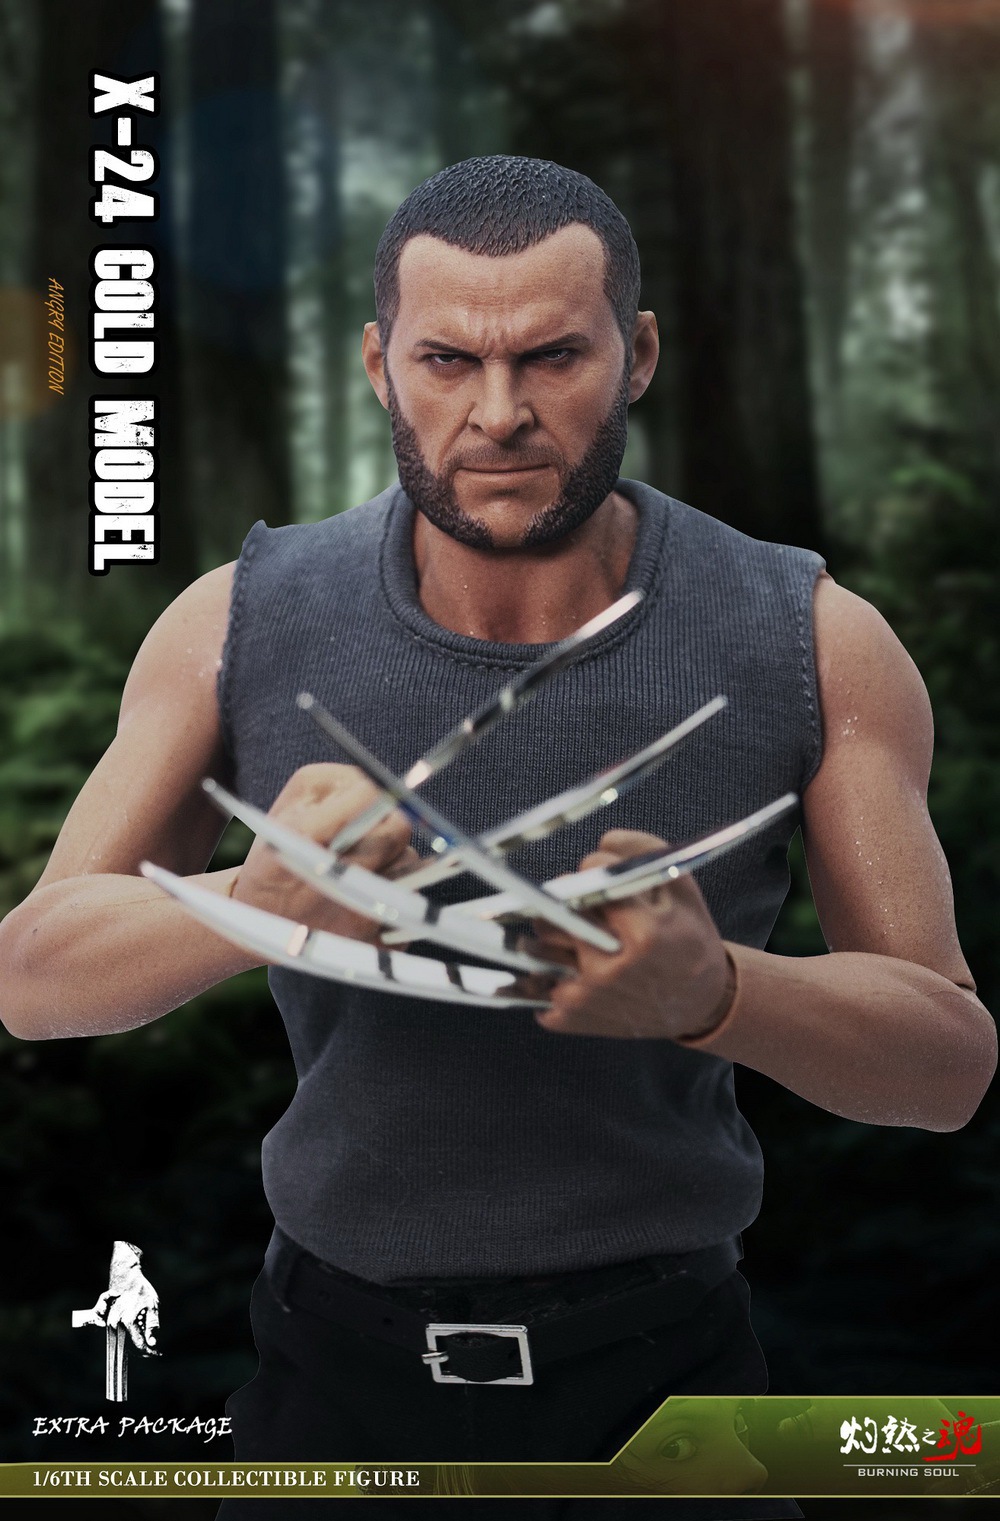 WolverineVillain - NEW PRODUCT: Burning Soul: 1/6 Wolverine Villain X24 Normal and Damaged Action Figure 84a7bf10